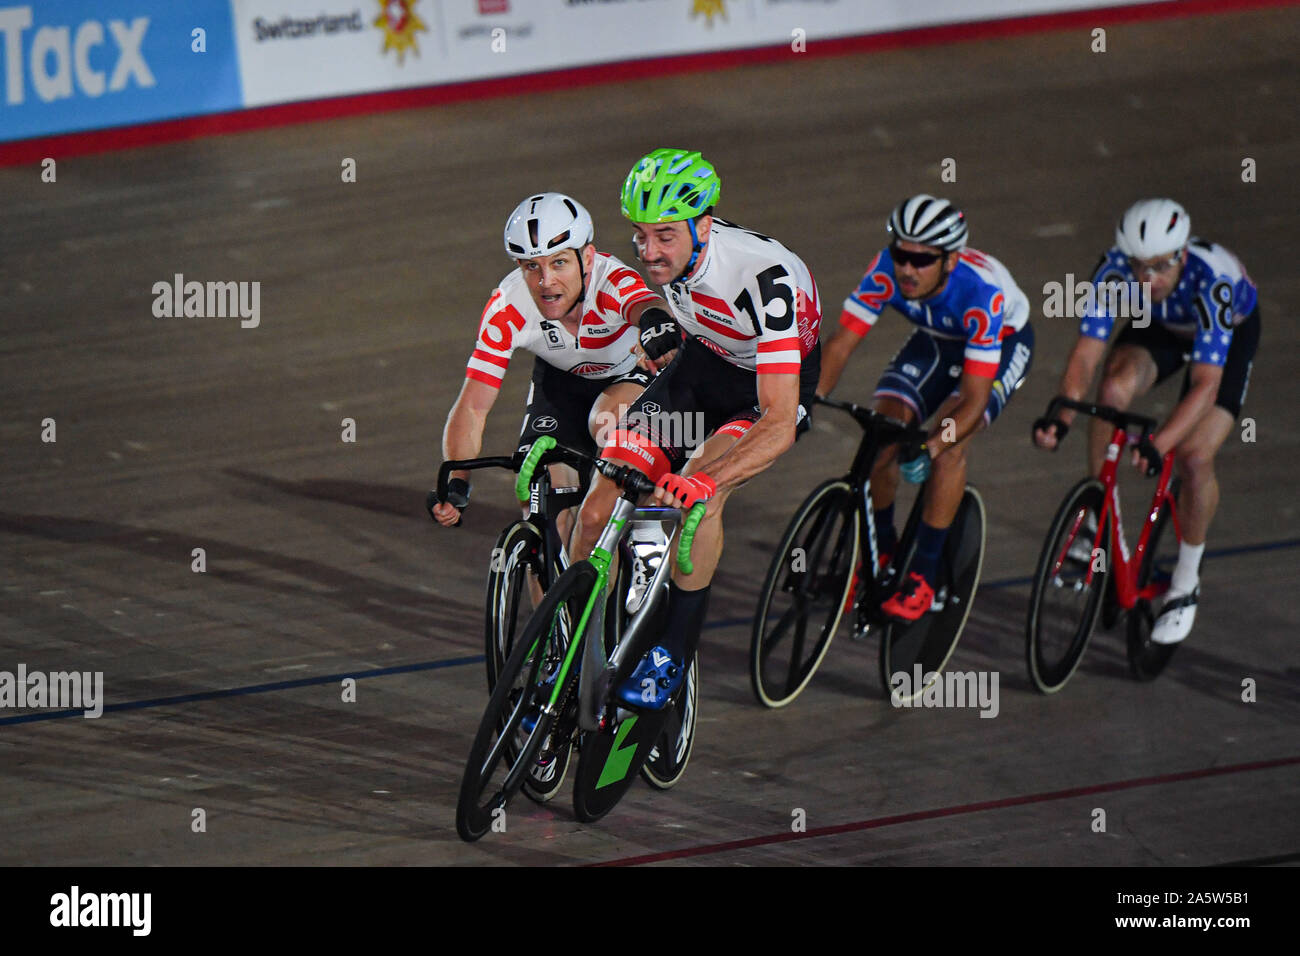 LONDON, UNITED KINGDOM. 22th Oct, 2019. Andreas M?ller and Andreas Graf (Austria) compete in MenÕs Madison Chase  during Day 1 of Six Day London 2019 at Lee Valley VeloPark on Tuesday, October 22, 2019 in LONDON, UNITED KINGDOM. Credit: Taka G Wu/Alamy Live News Stock Photo